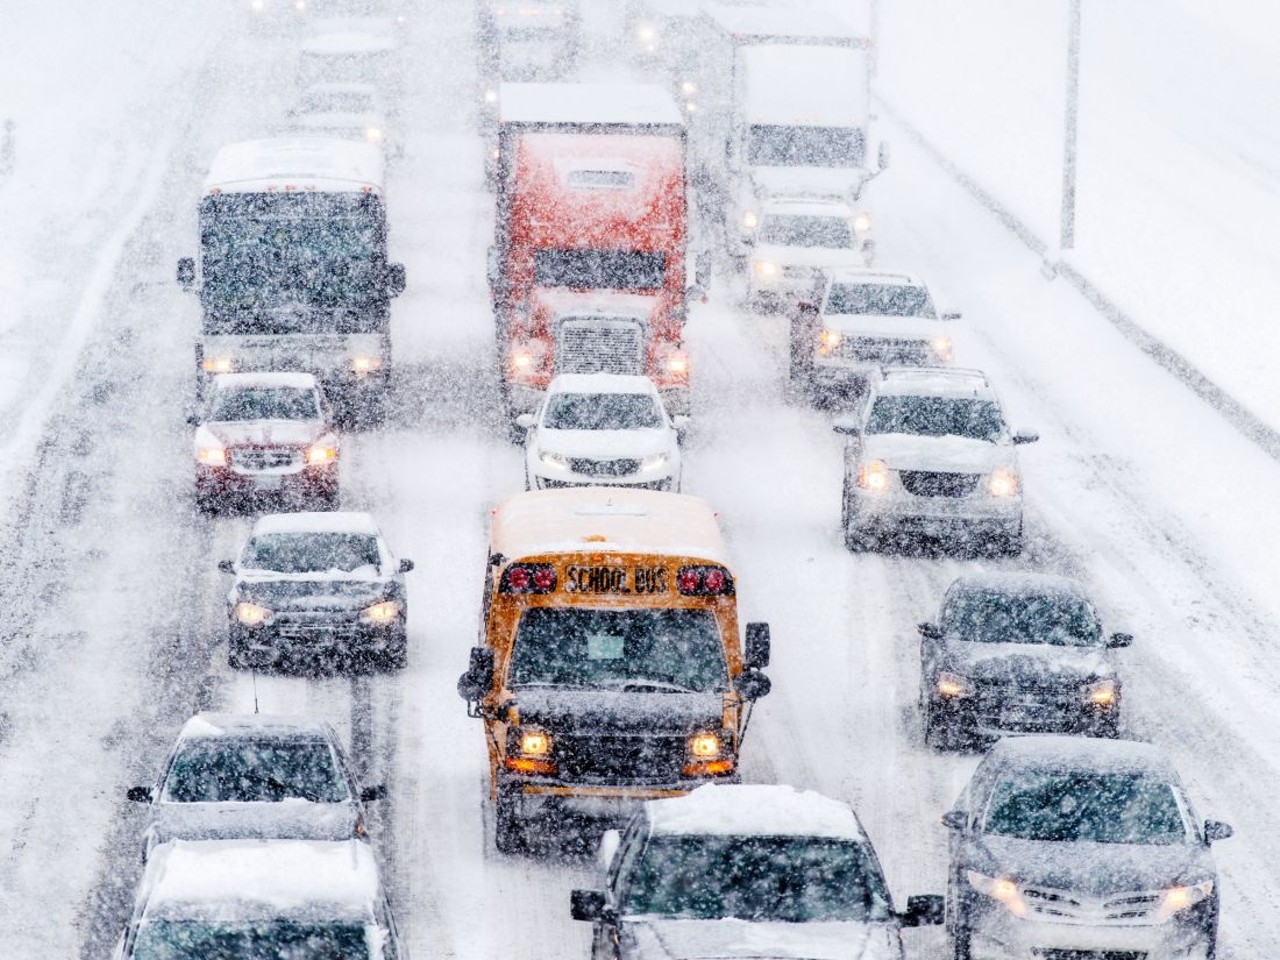  30 minute commutes become 3-hour commutes every. Single. Time. It. Snows.  
Between rush hour, black ice, accidents, and that a-hole who didn't brush the snow off the roof of his car, commutes quickly become a never-ending purgatory every time it snows. 
Photo via  Wired